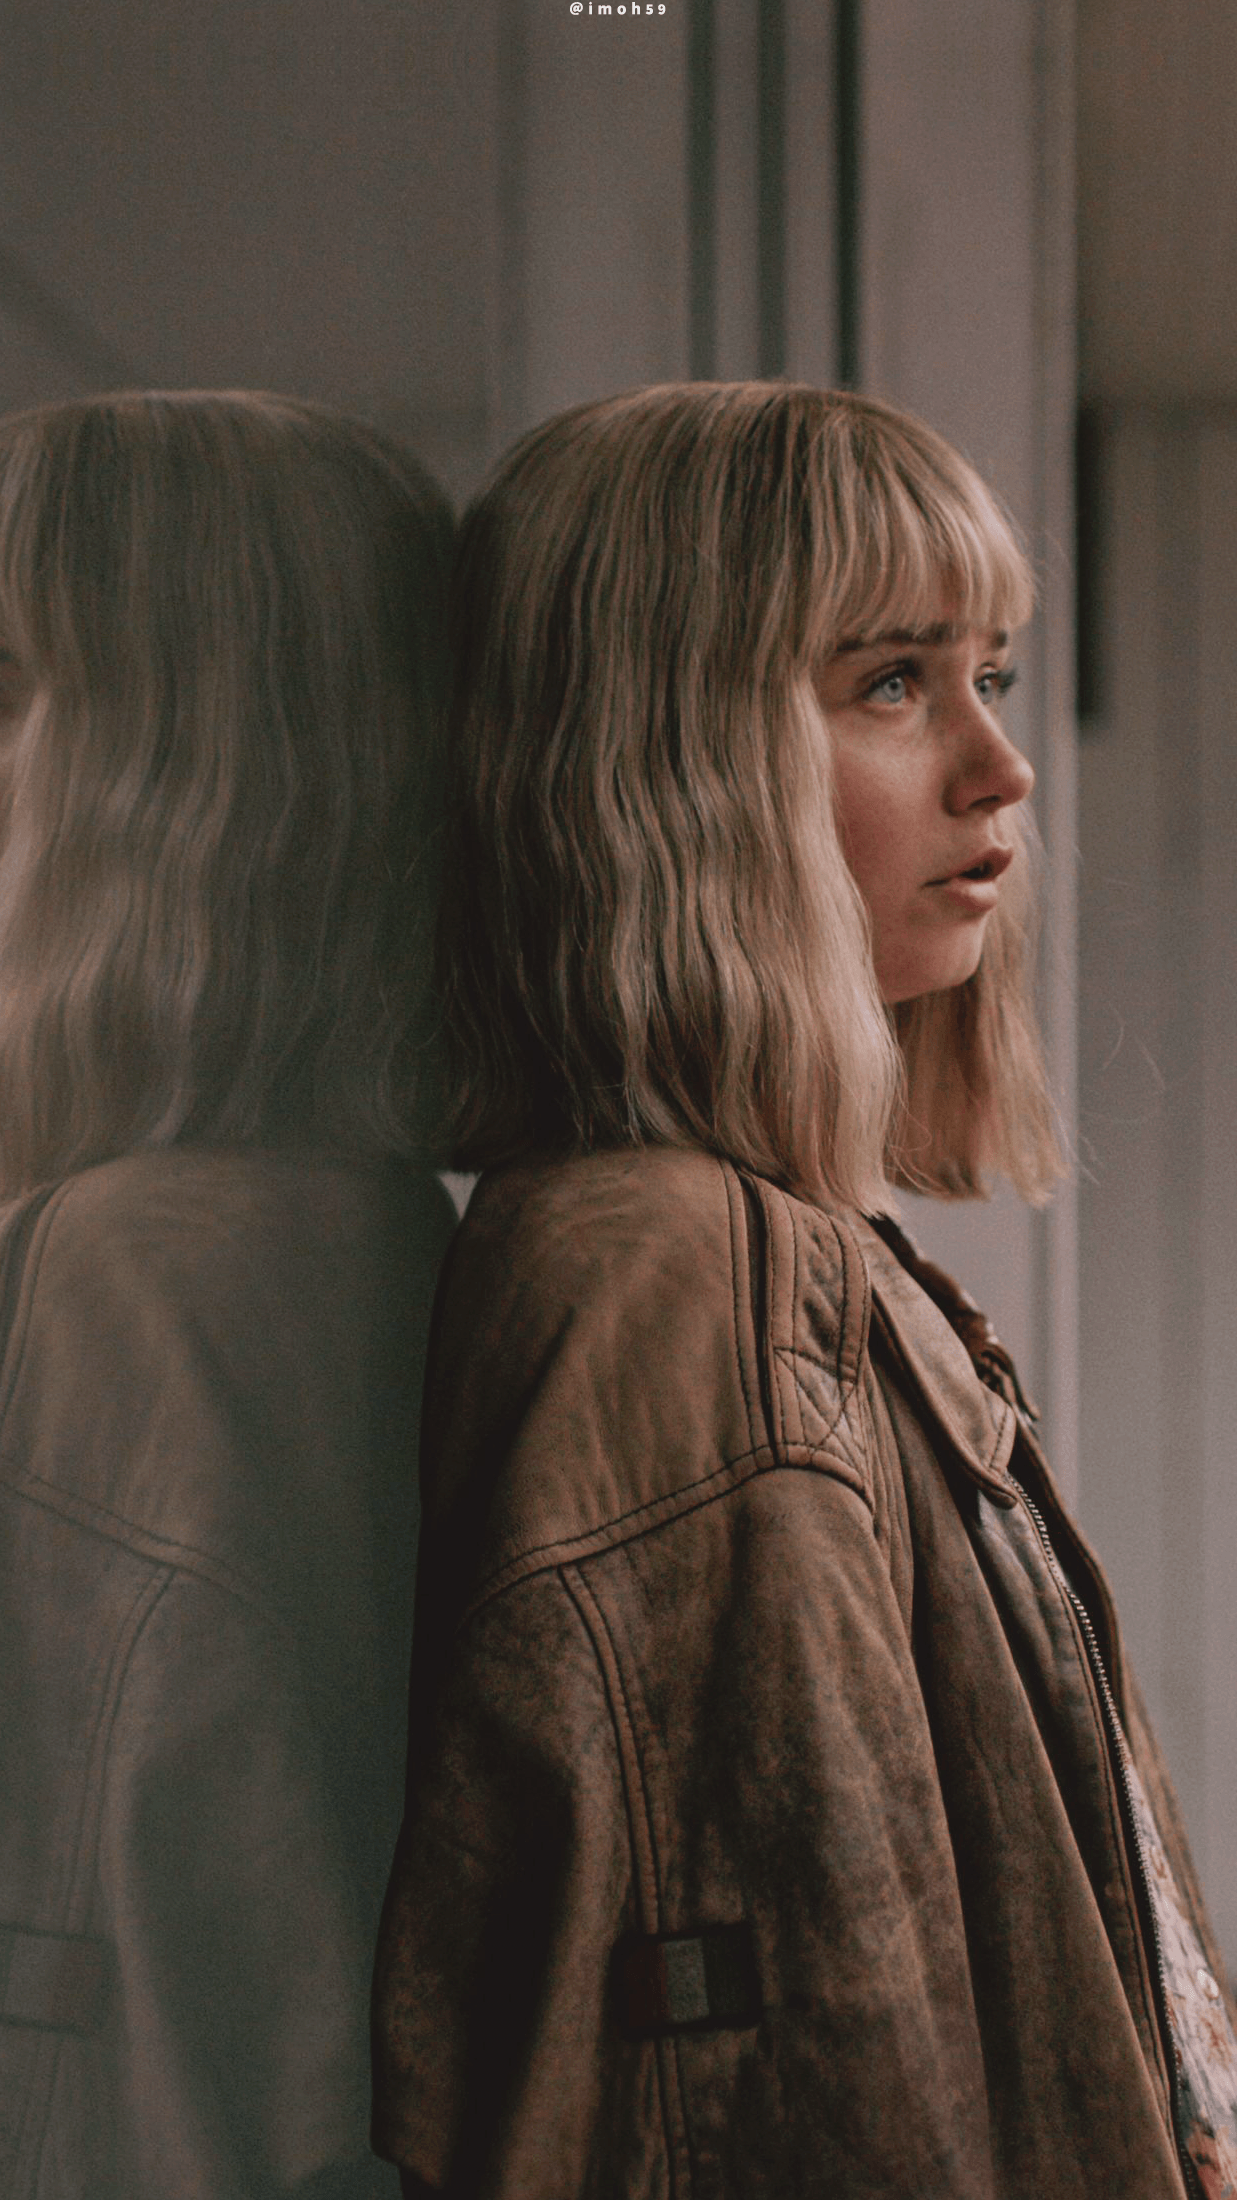 The End Of The F***Ing World Staffel 2